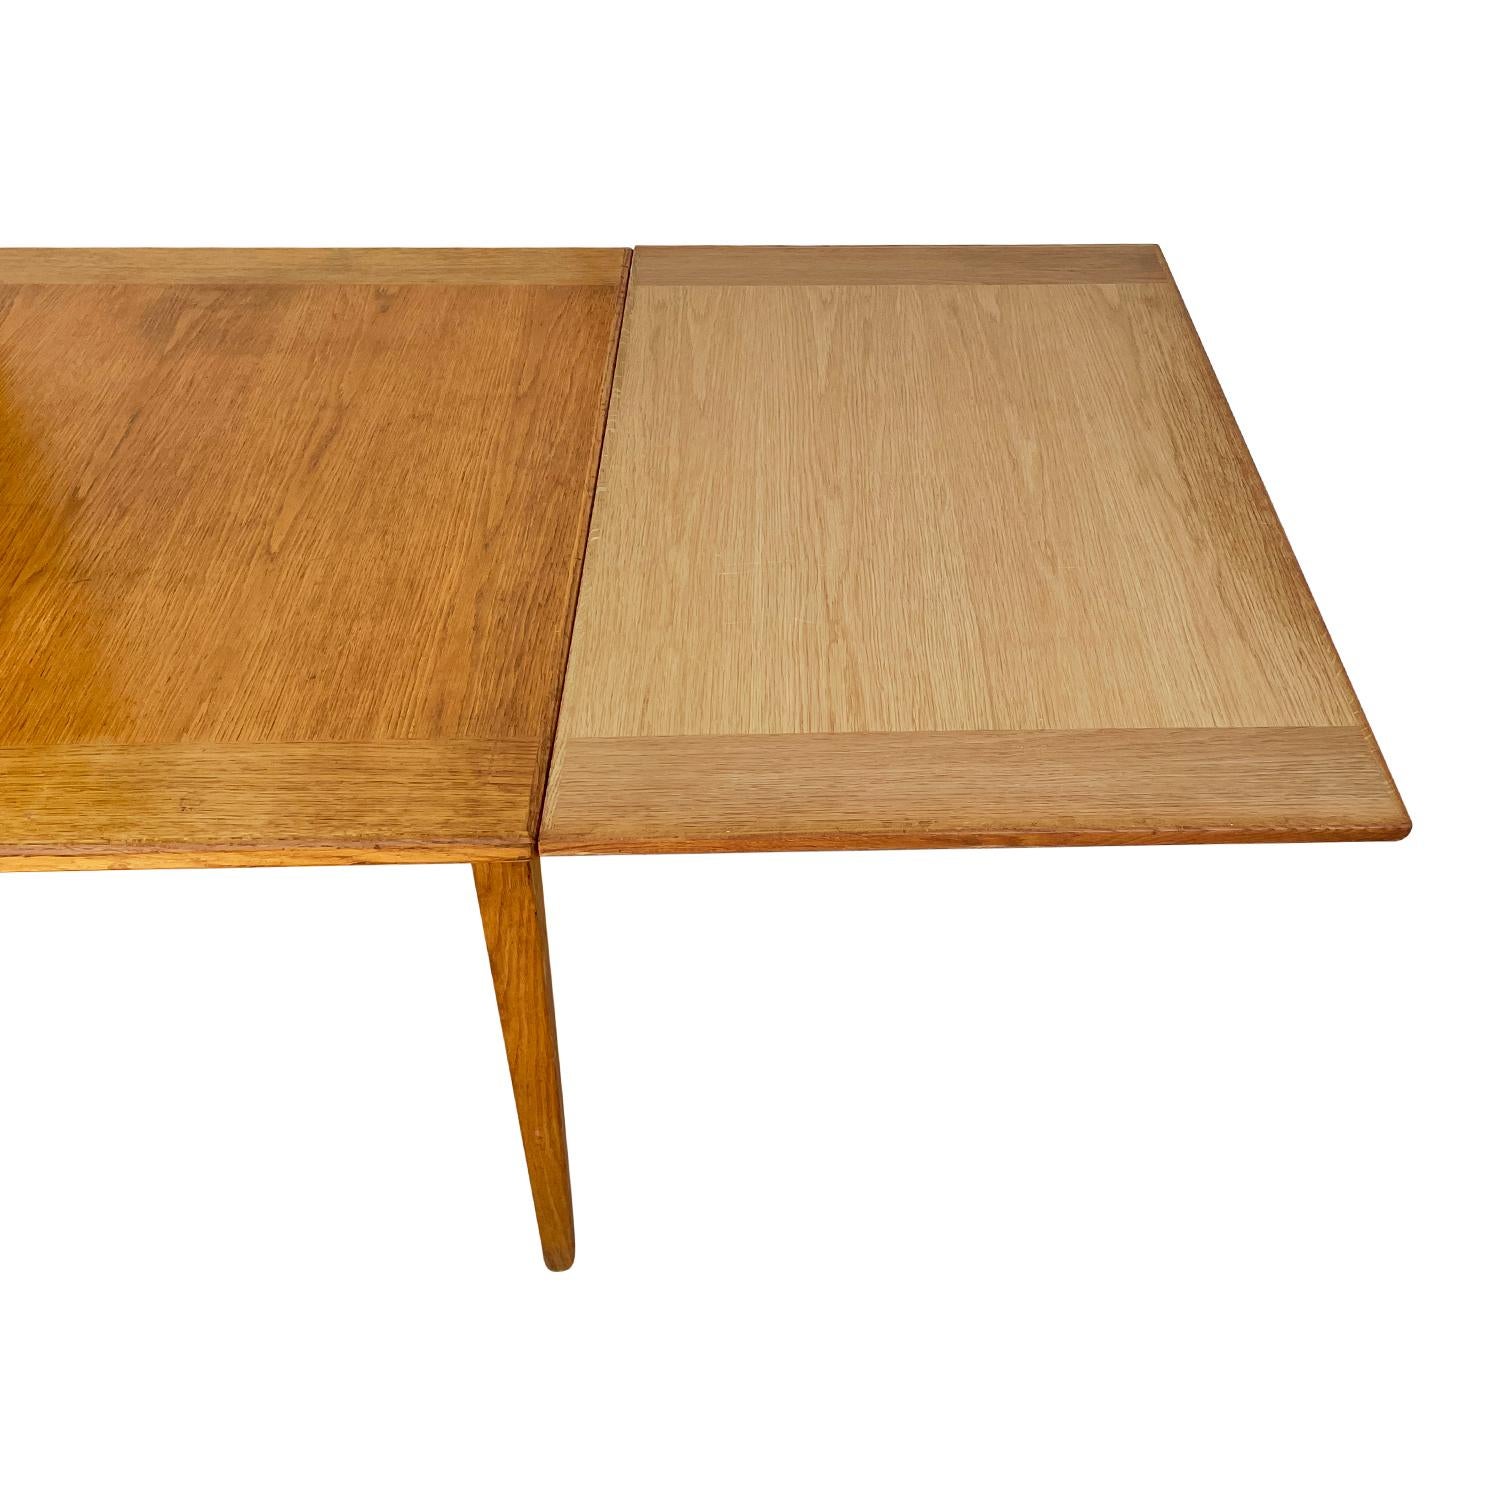 Hand-Carved 20th Century Swedish Mid-Century Extendable Walnut Dining Table by Carl Malmsten For Sale